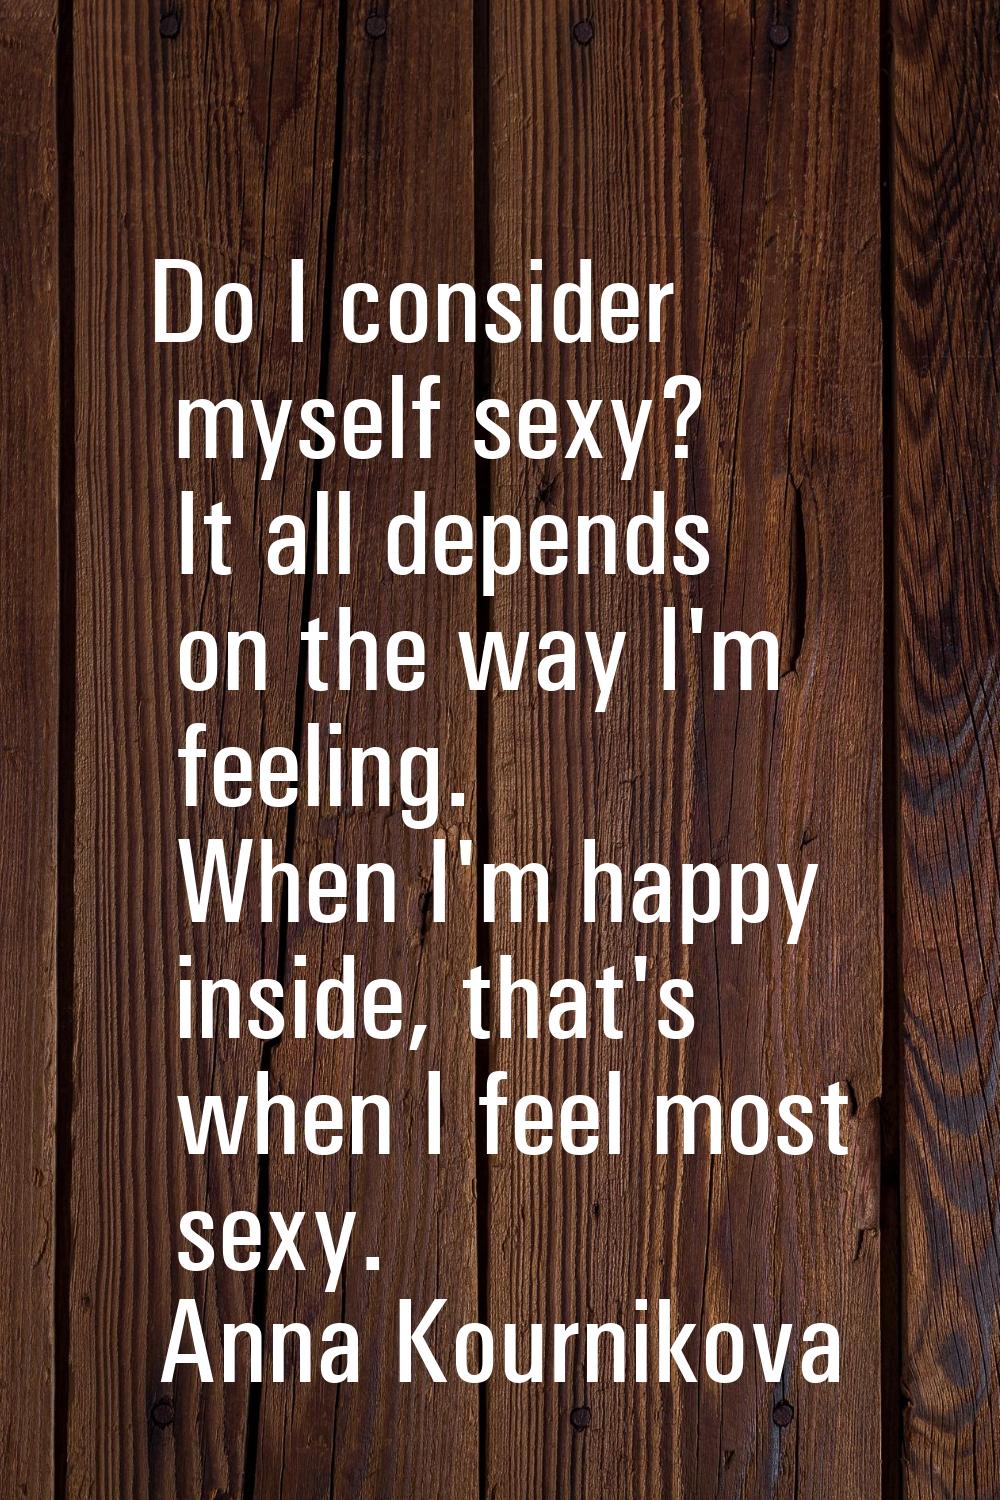 Do I consider myself sexy? It all depends on the way I'm feeling. When I'm happy inside, that's whe